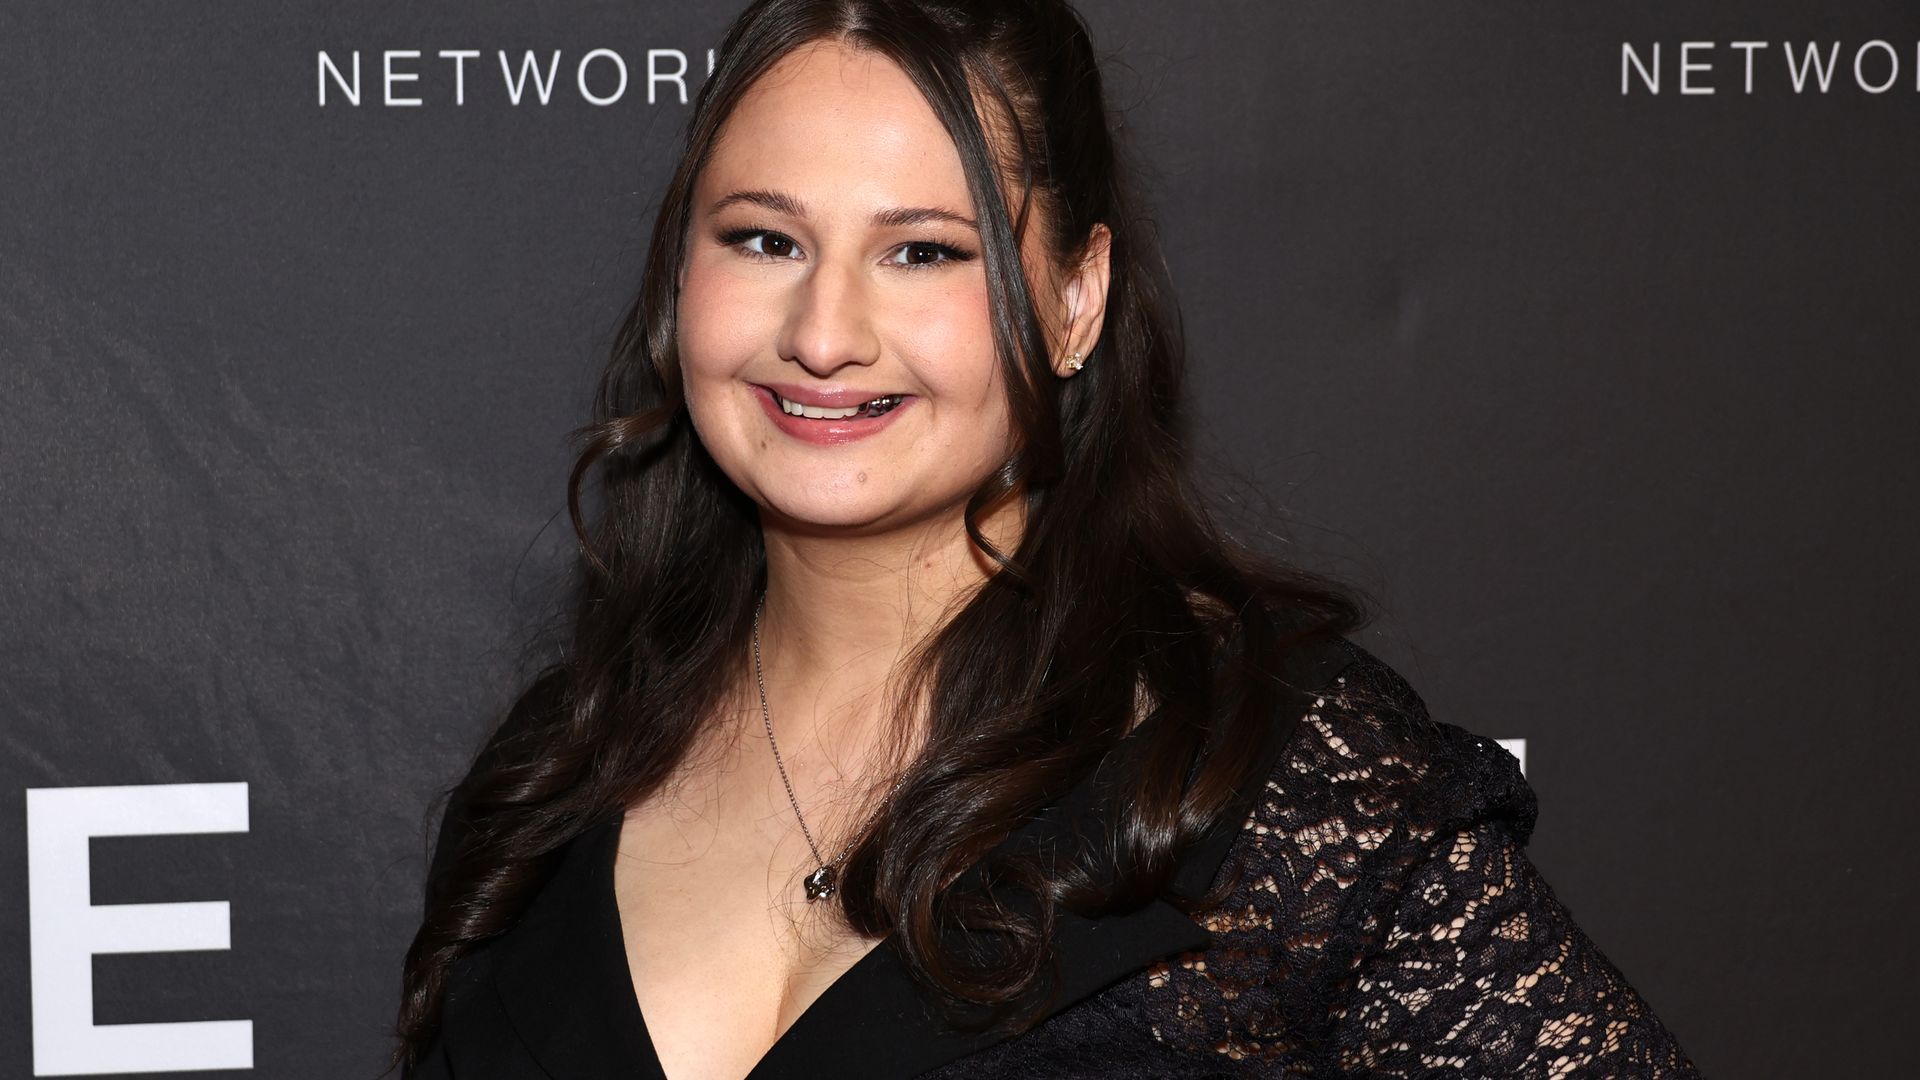 Gypsy Rose Blanchard unveils dramatic new look after undergoing plastic surgery